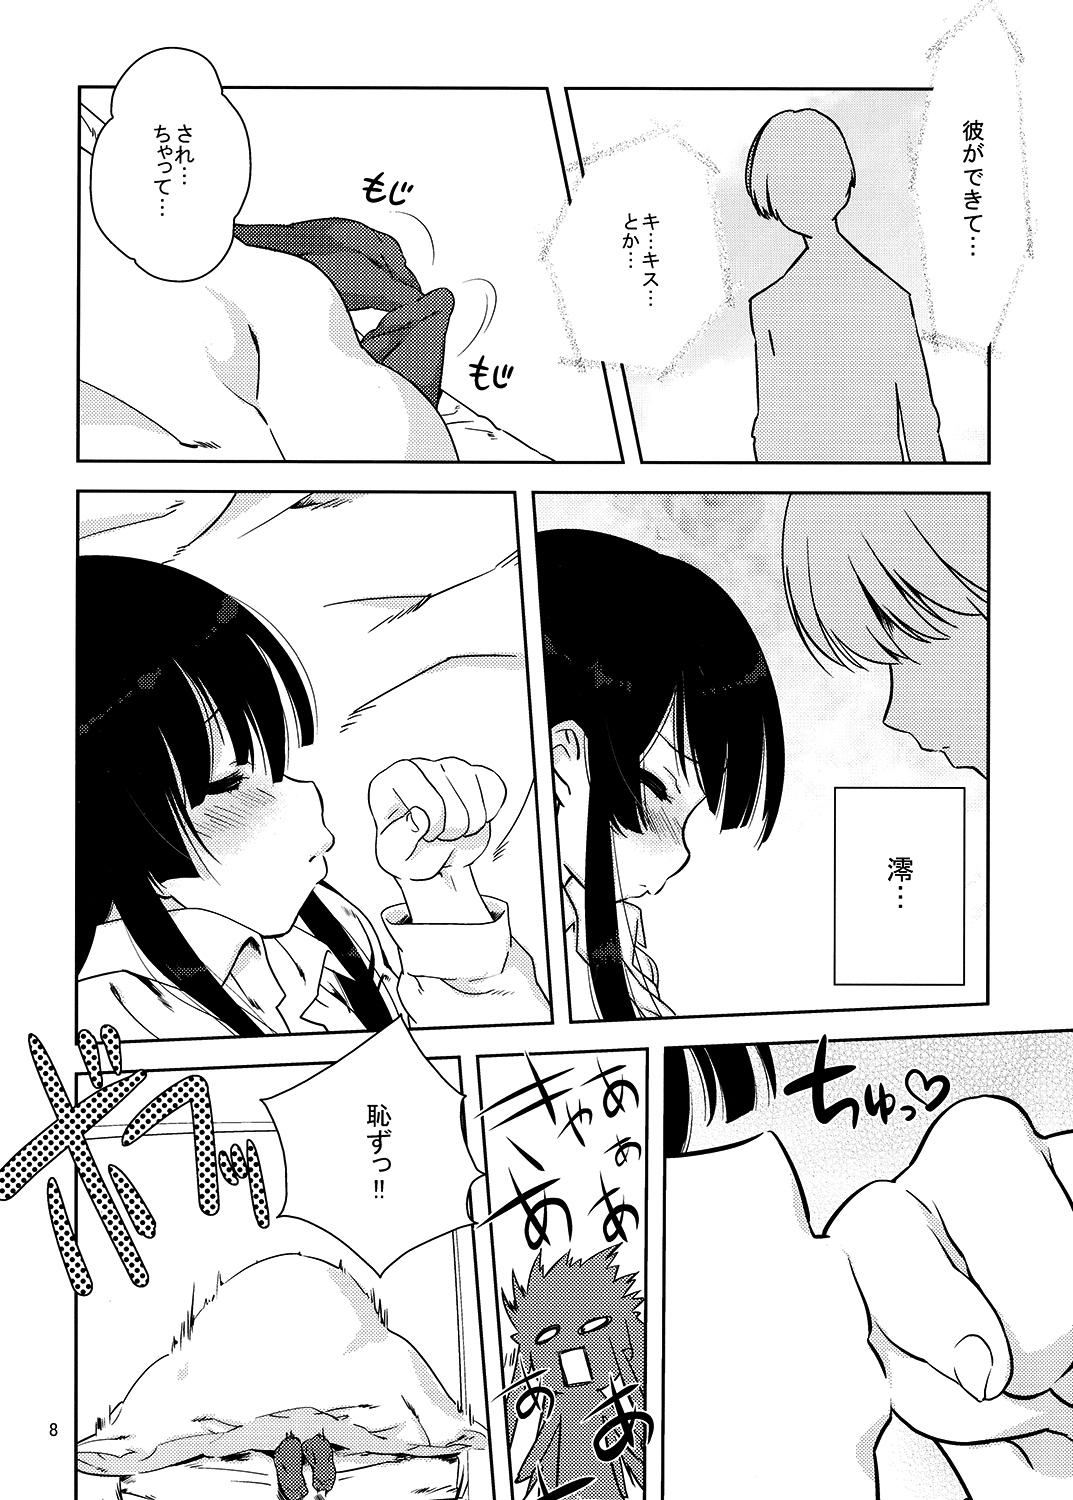 Boots Mio-tan! - K on Babe - Page 7